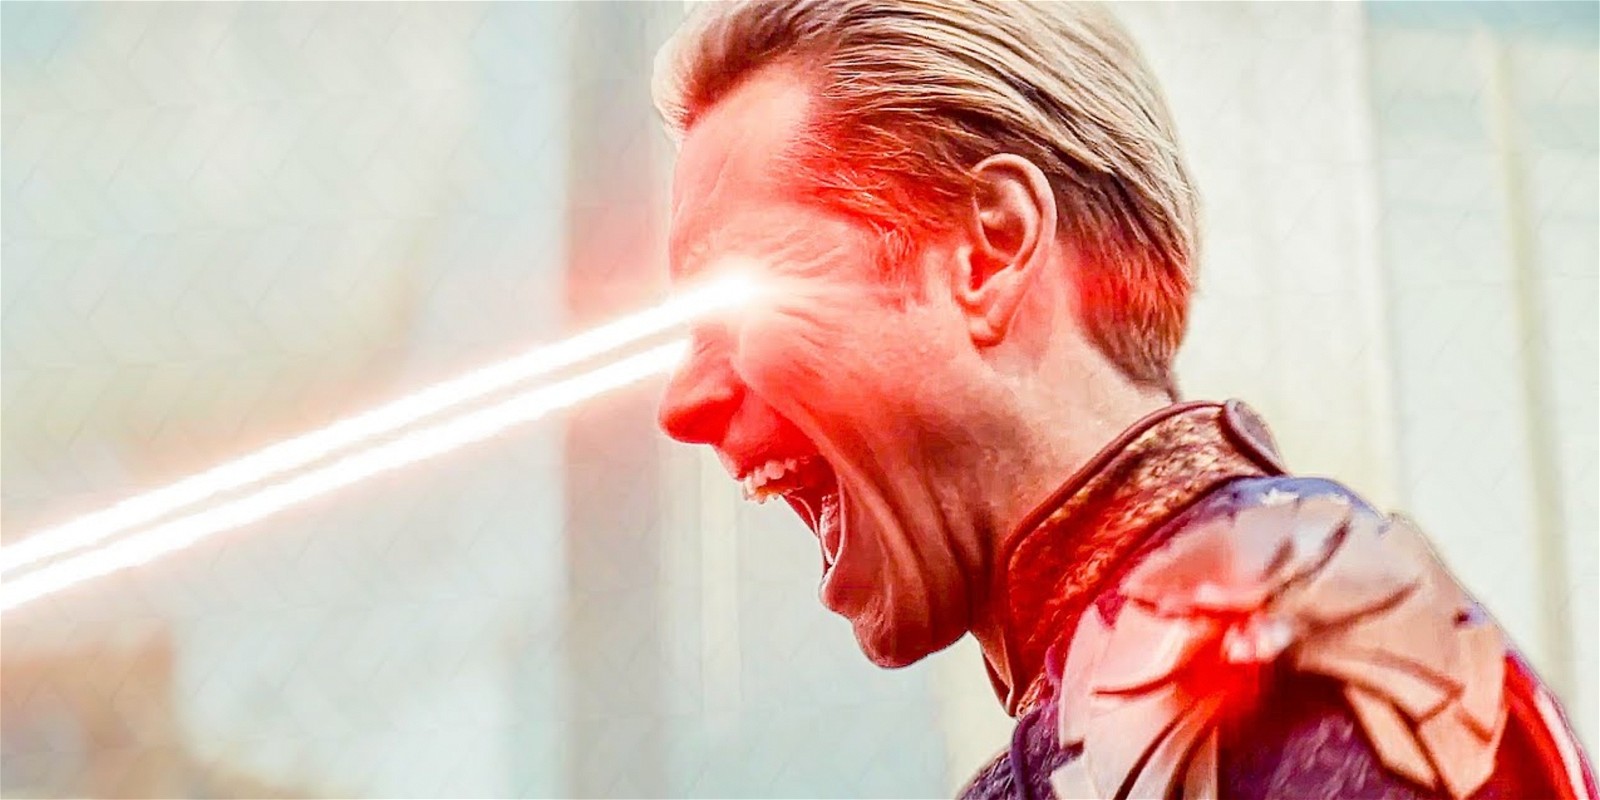 An angry Homelander firing laser off his eyes in a still from The Boys